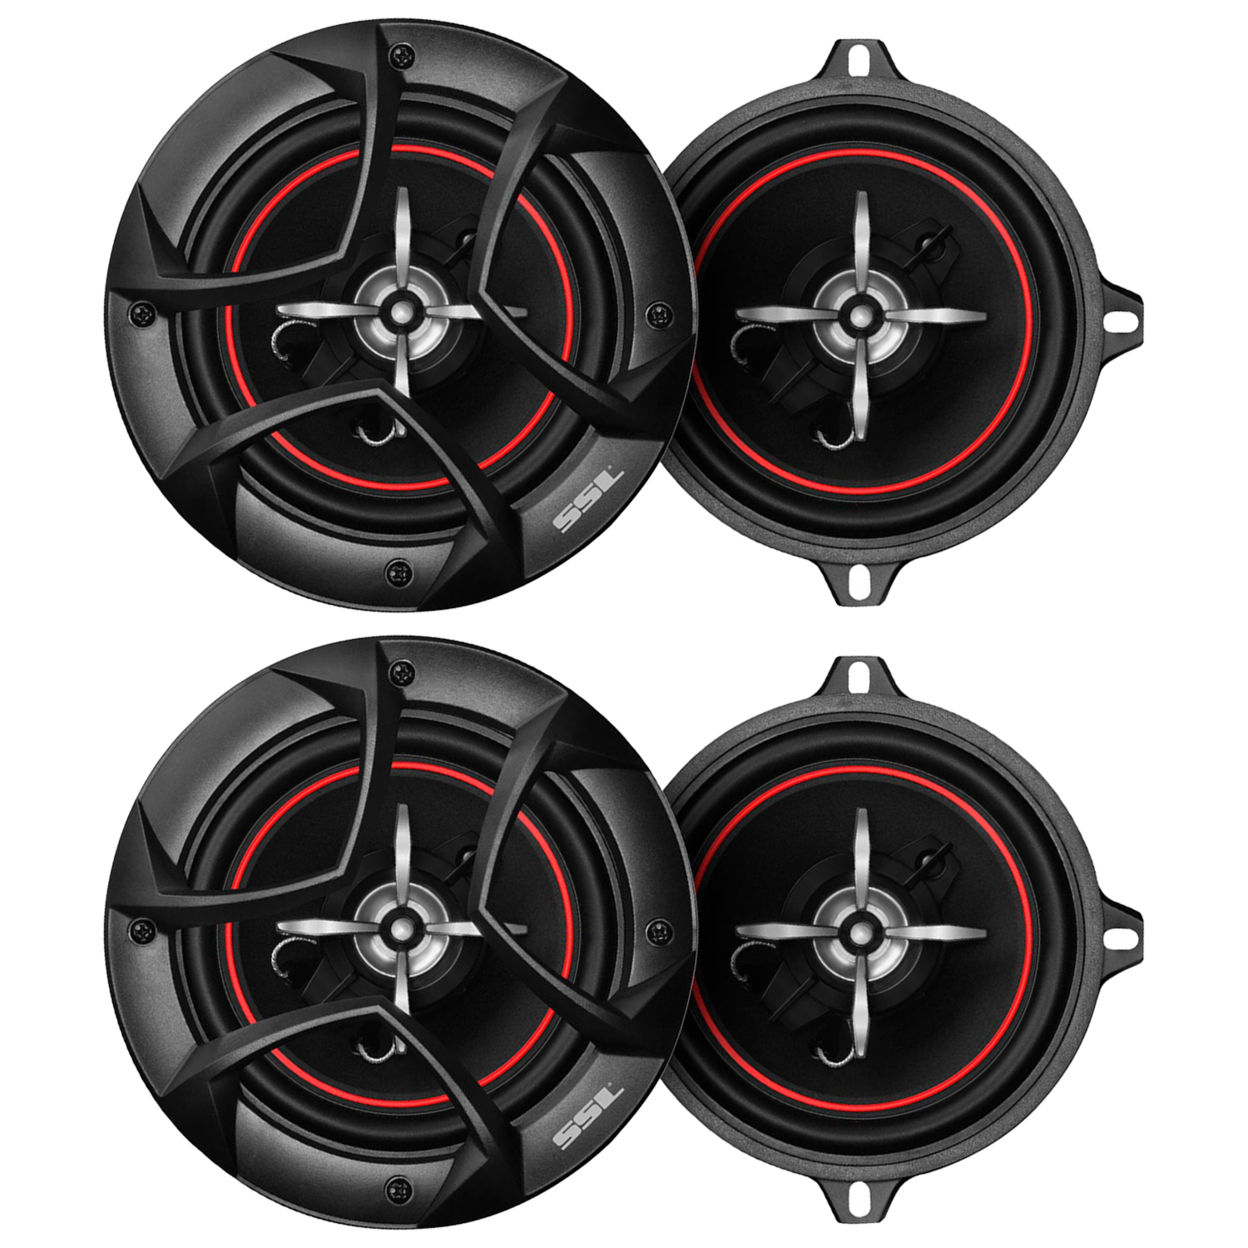 (Qyt 2) Sound Storm Laboratories 5.25 Inch Car Speakers - 250 Watts Of Power Per Pair, 125 Watts Each, Full Range, 3 Way, Sold In Pairs